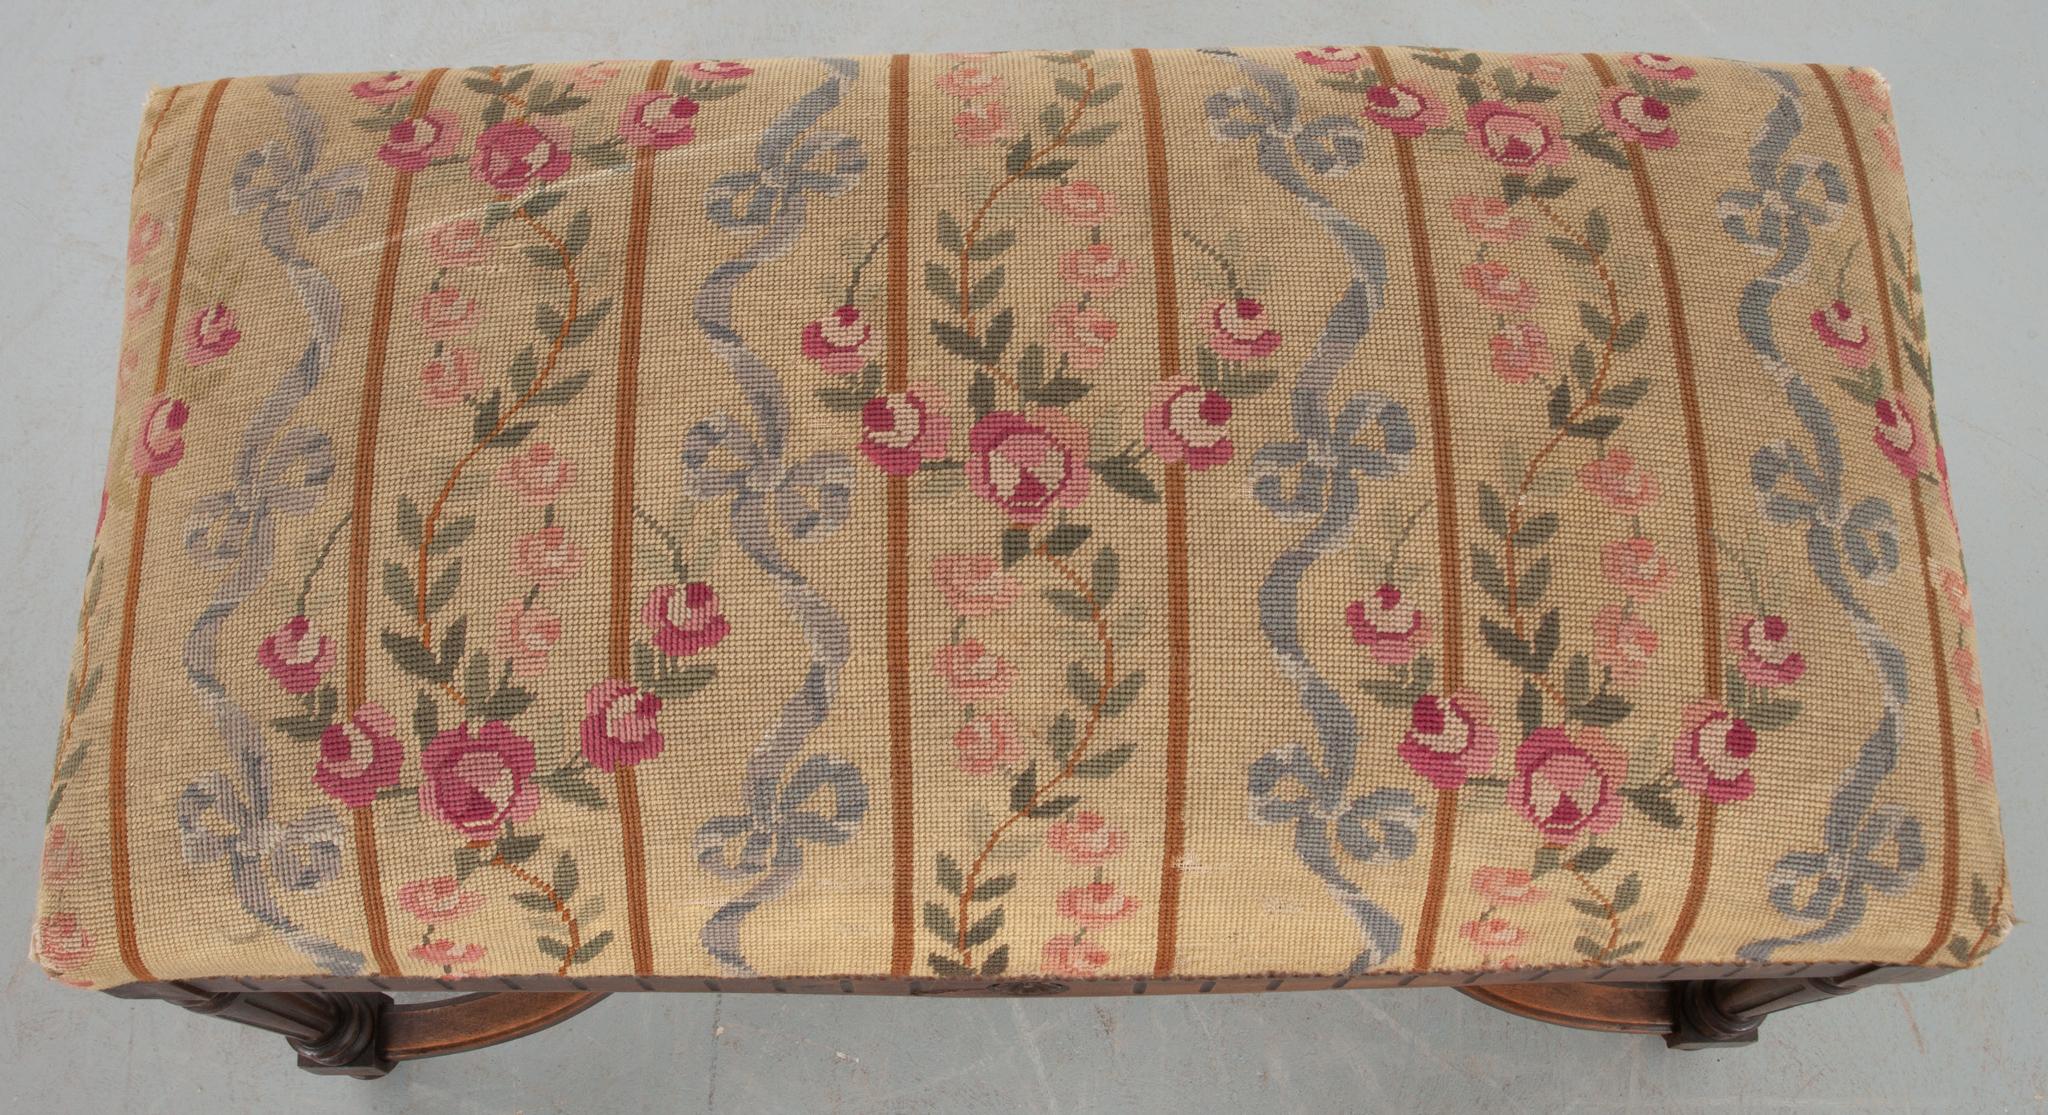 19th Century French Carved Walnut Bench with Needlepoint Upholstery